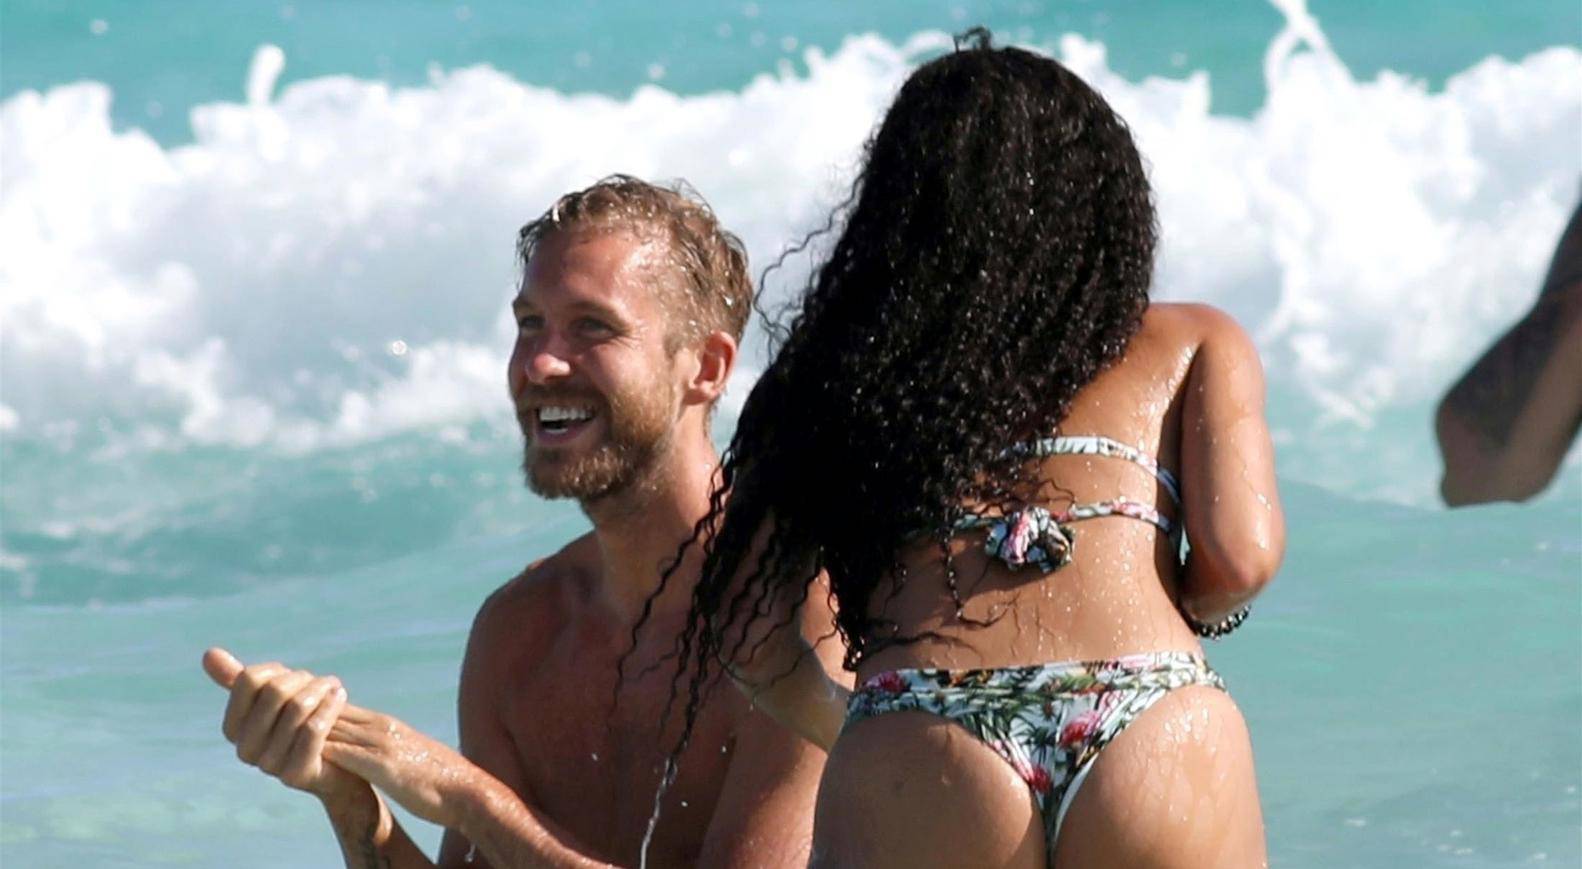 *PREMIUM-EXCLUSIVE* MUST CALL FOR PRICING BEFORE USAGE  - STRICTLY NOT AVAILABLE FOR ONLINE USAGE UNTIL 22:00 PM UK TIME ON 25/08/2022  - Scottish DJ Calvin Harris and his girlfriend Vick Hope look very much in love as they are snapped having a great t